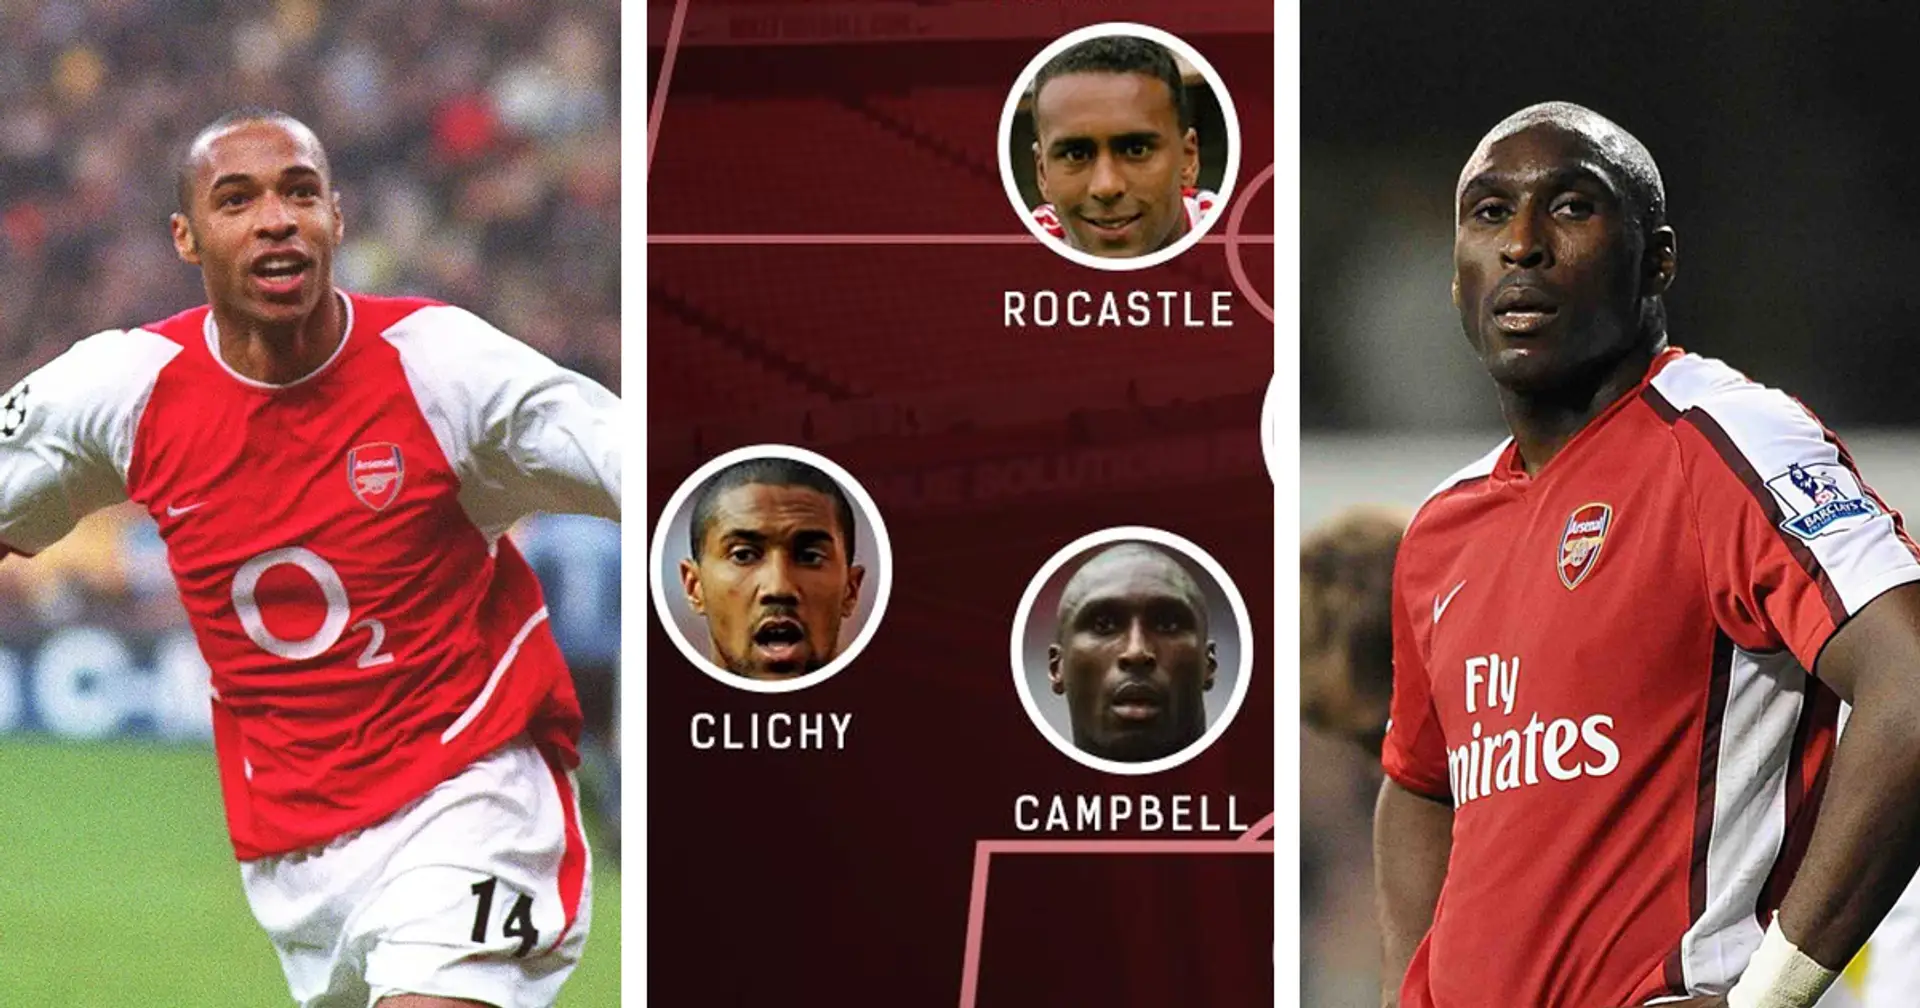 Campbell, Rocastle, Henry & others: Arsenal's all-time black XI